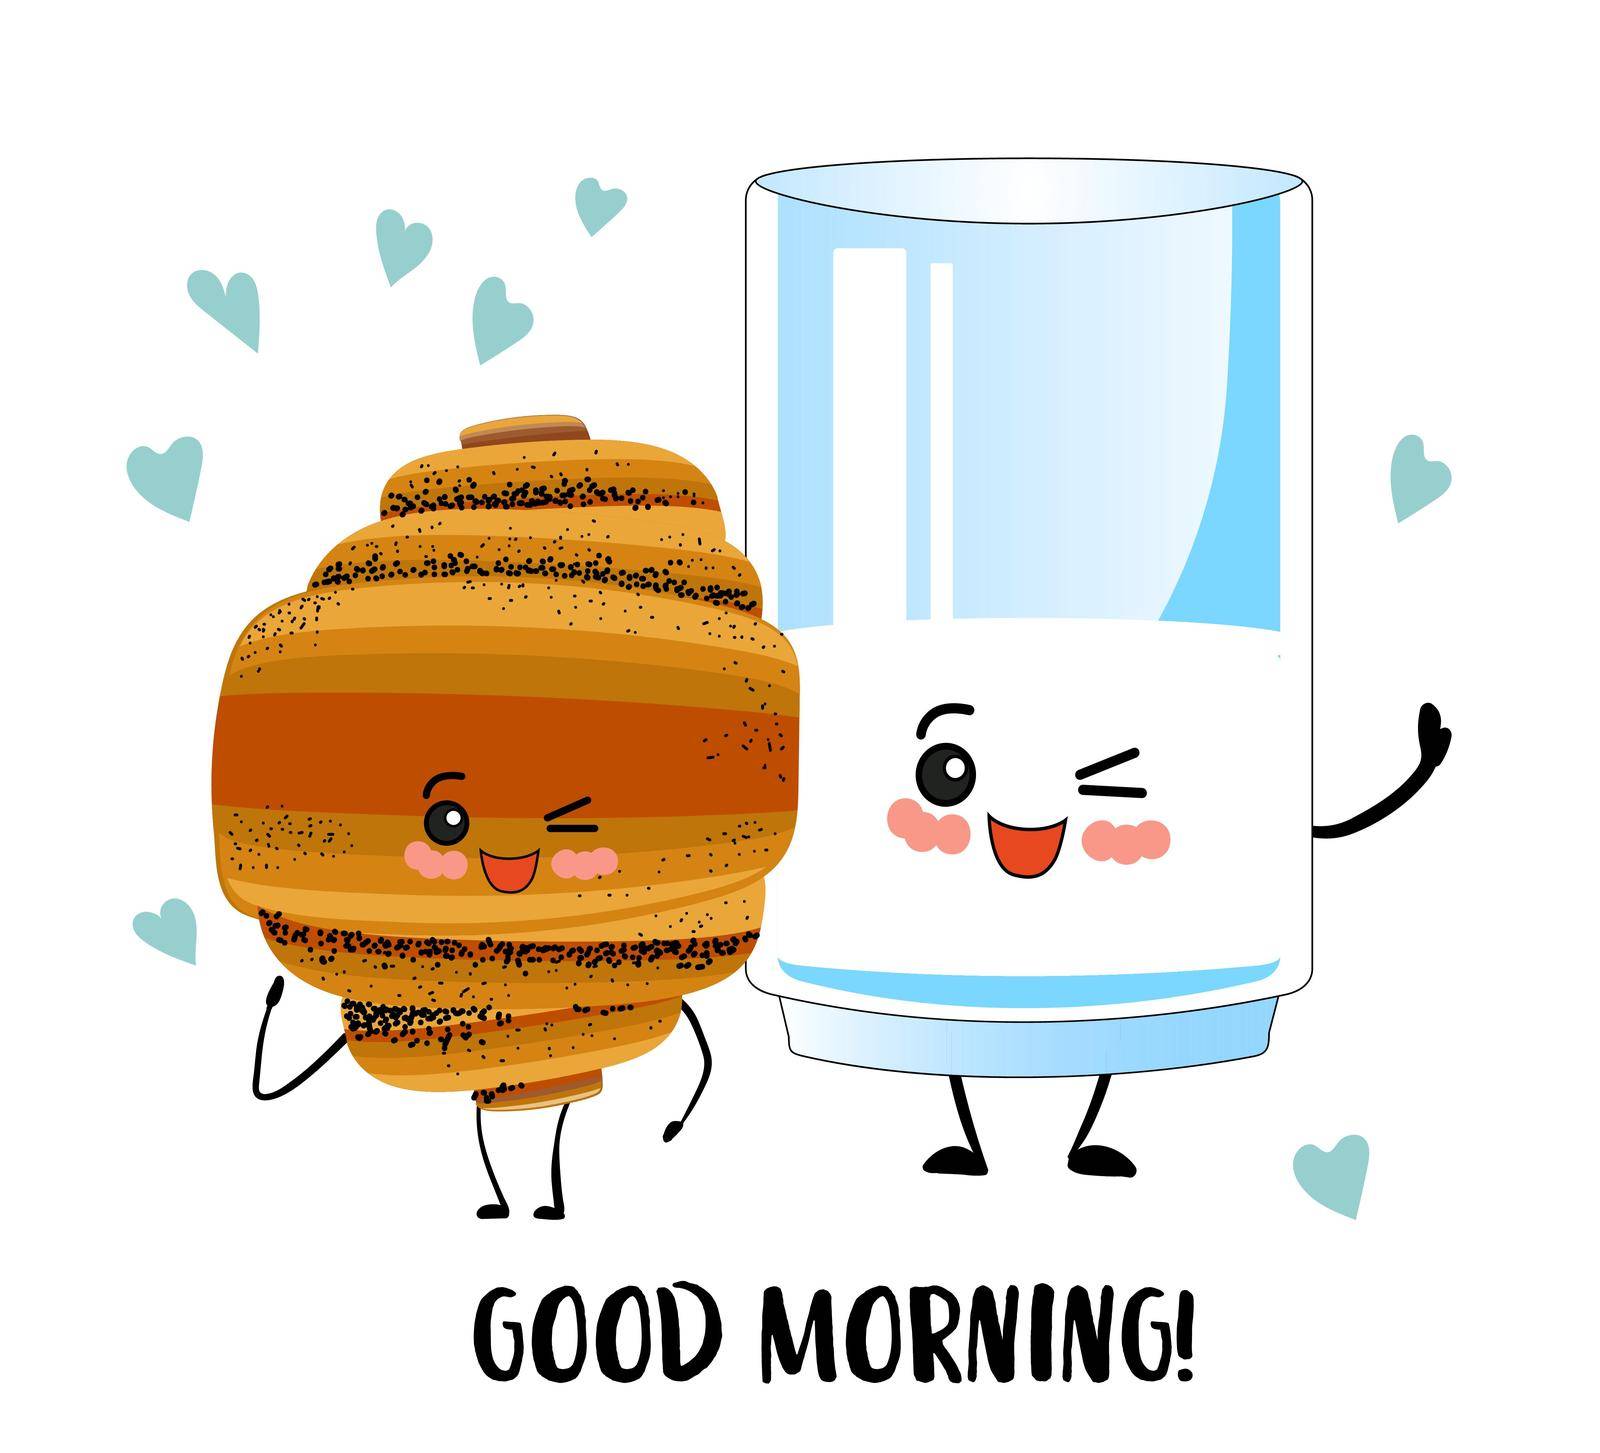 Good morning. A glass of milk and a croissant. Superhero Breakfast. Cute cartoon characters on a white background.